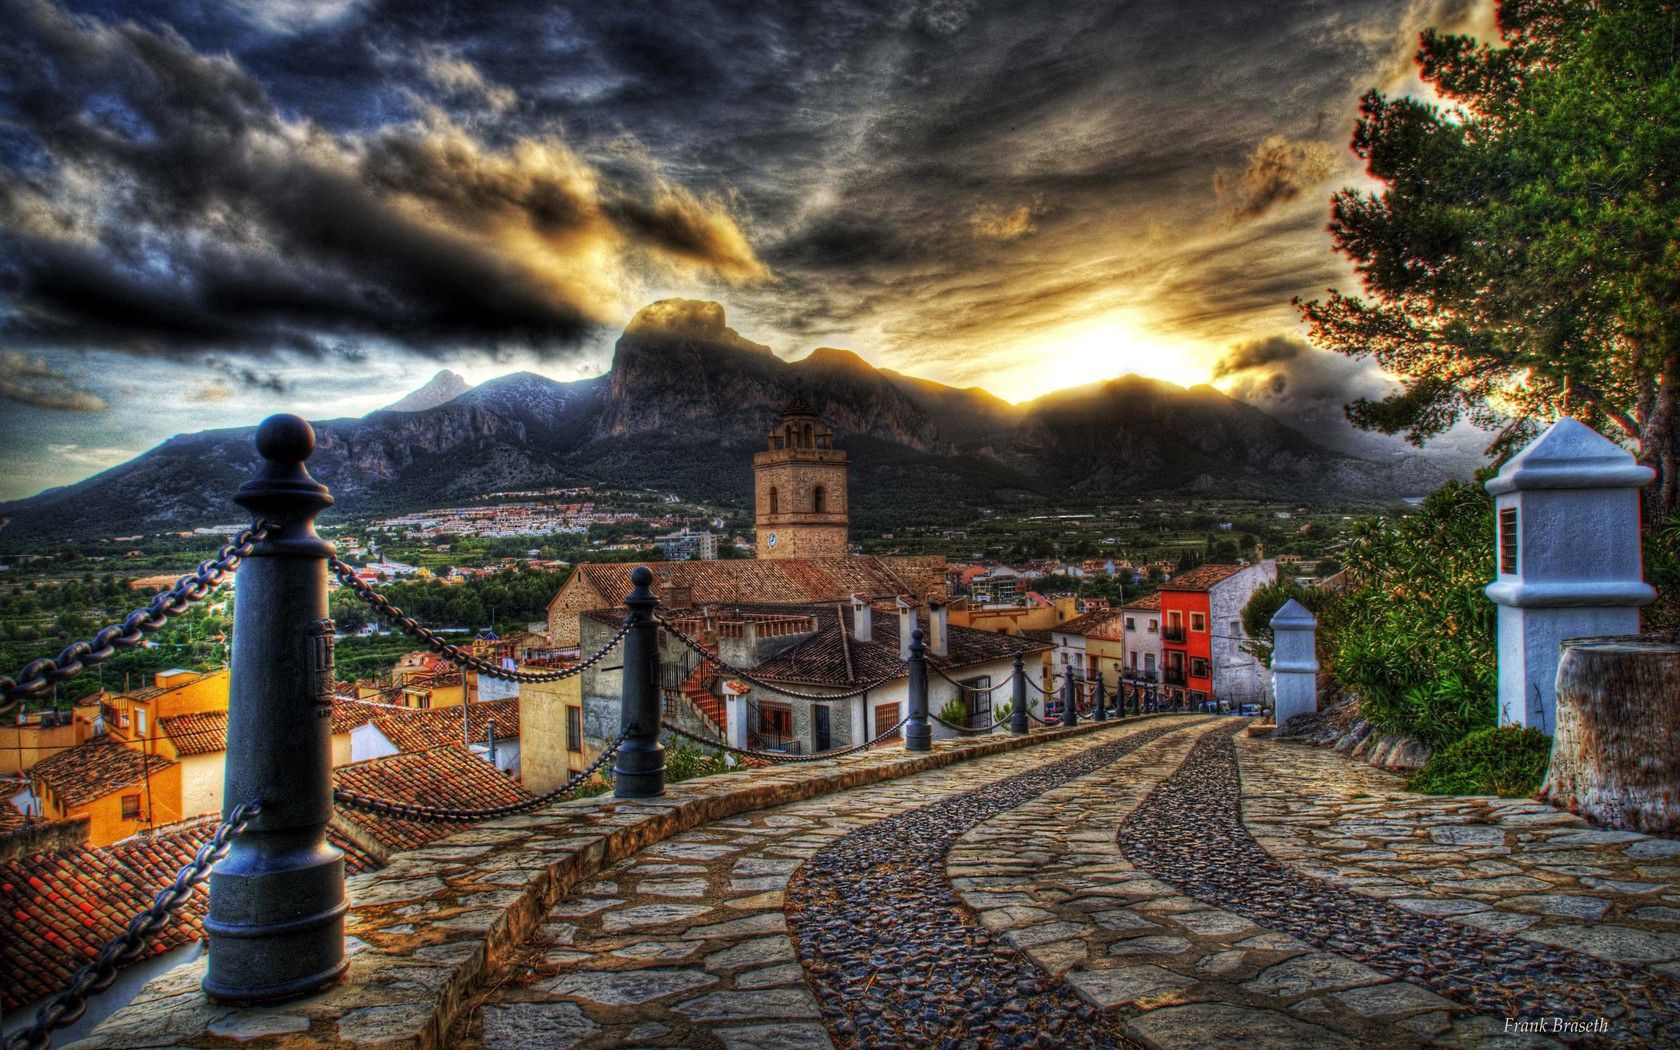 streets, sky, cities, flowers, houses, sunset, mountains, architecture, clouds, road, beautiful, old, colorful, hdr cellphone